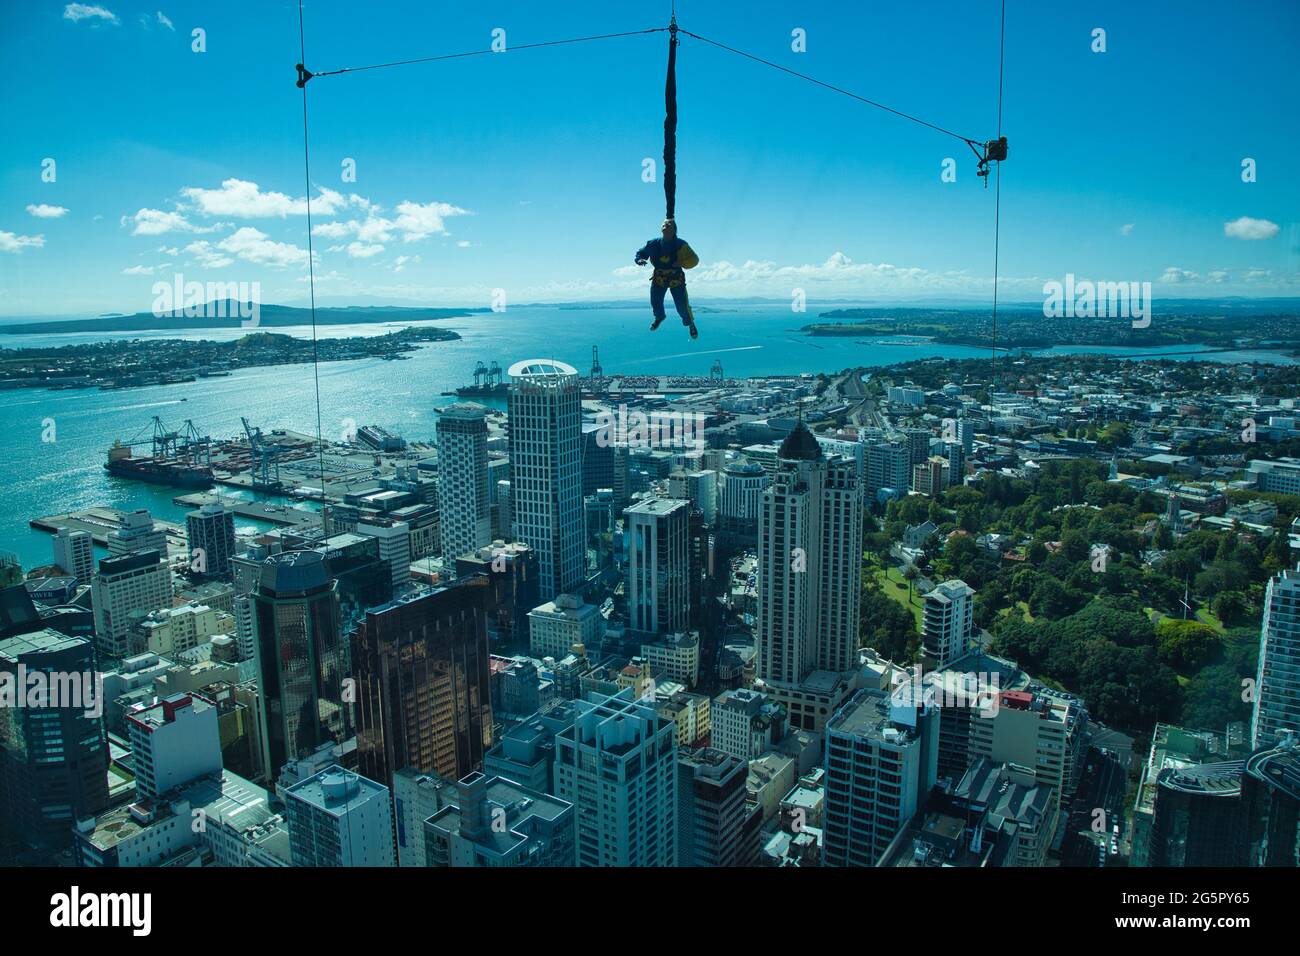 A person hangs in mid air just before doing a tethered sky fall from the Sky Tower in Auckland, North Island, New Zealand, with city buildings beyond Stock Photo